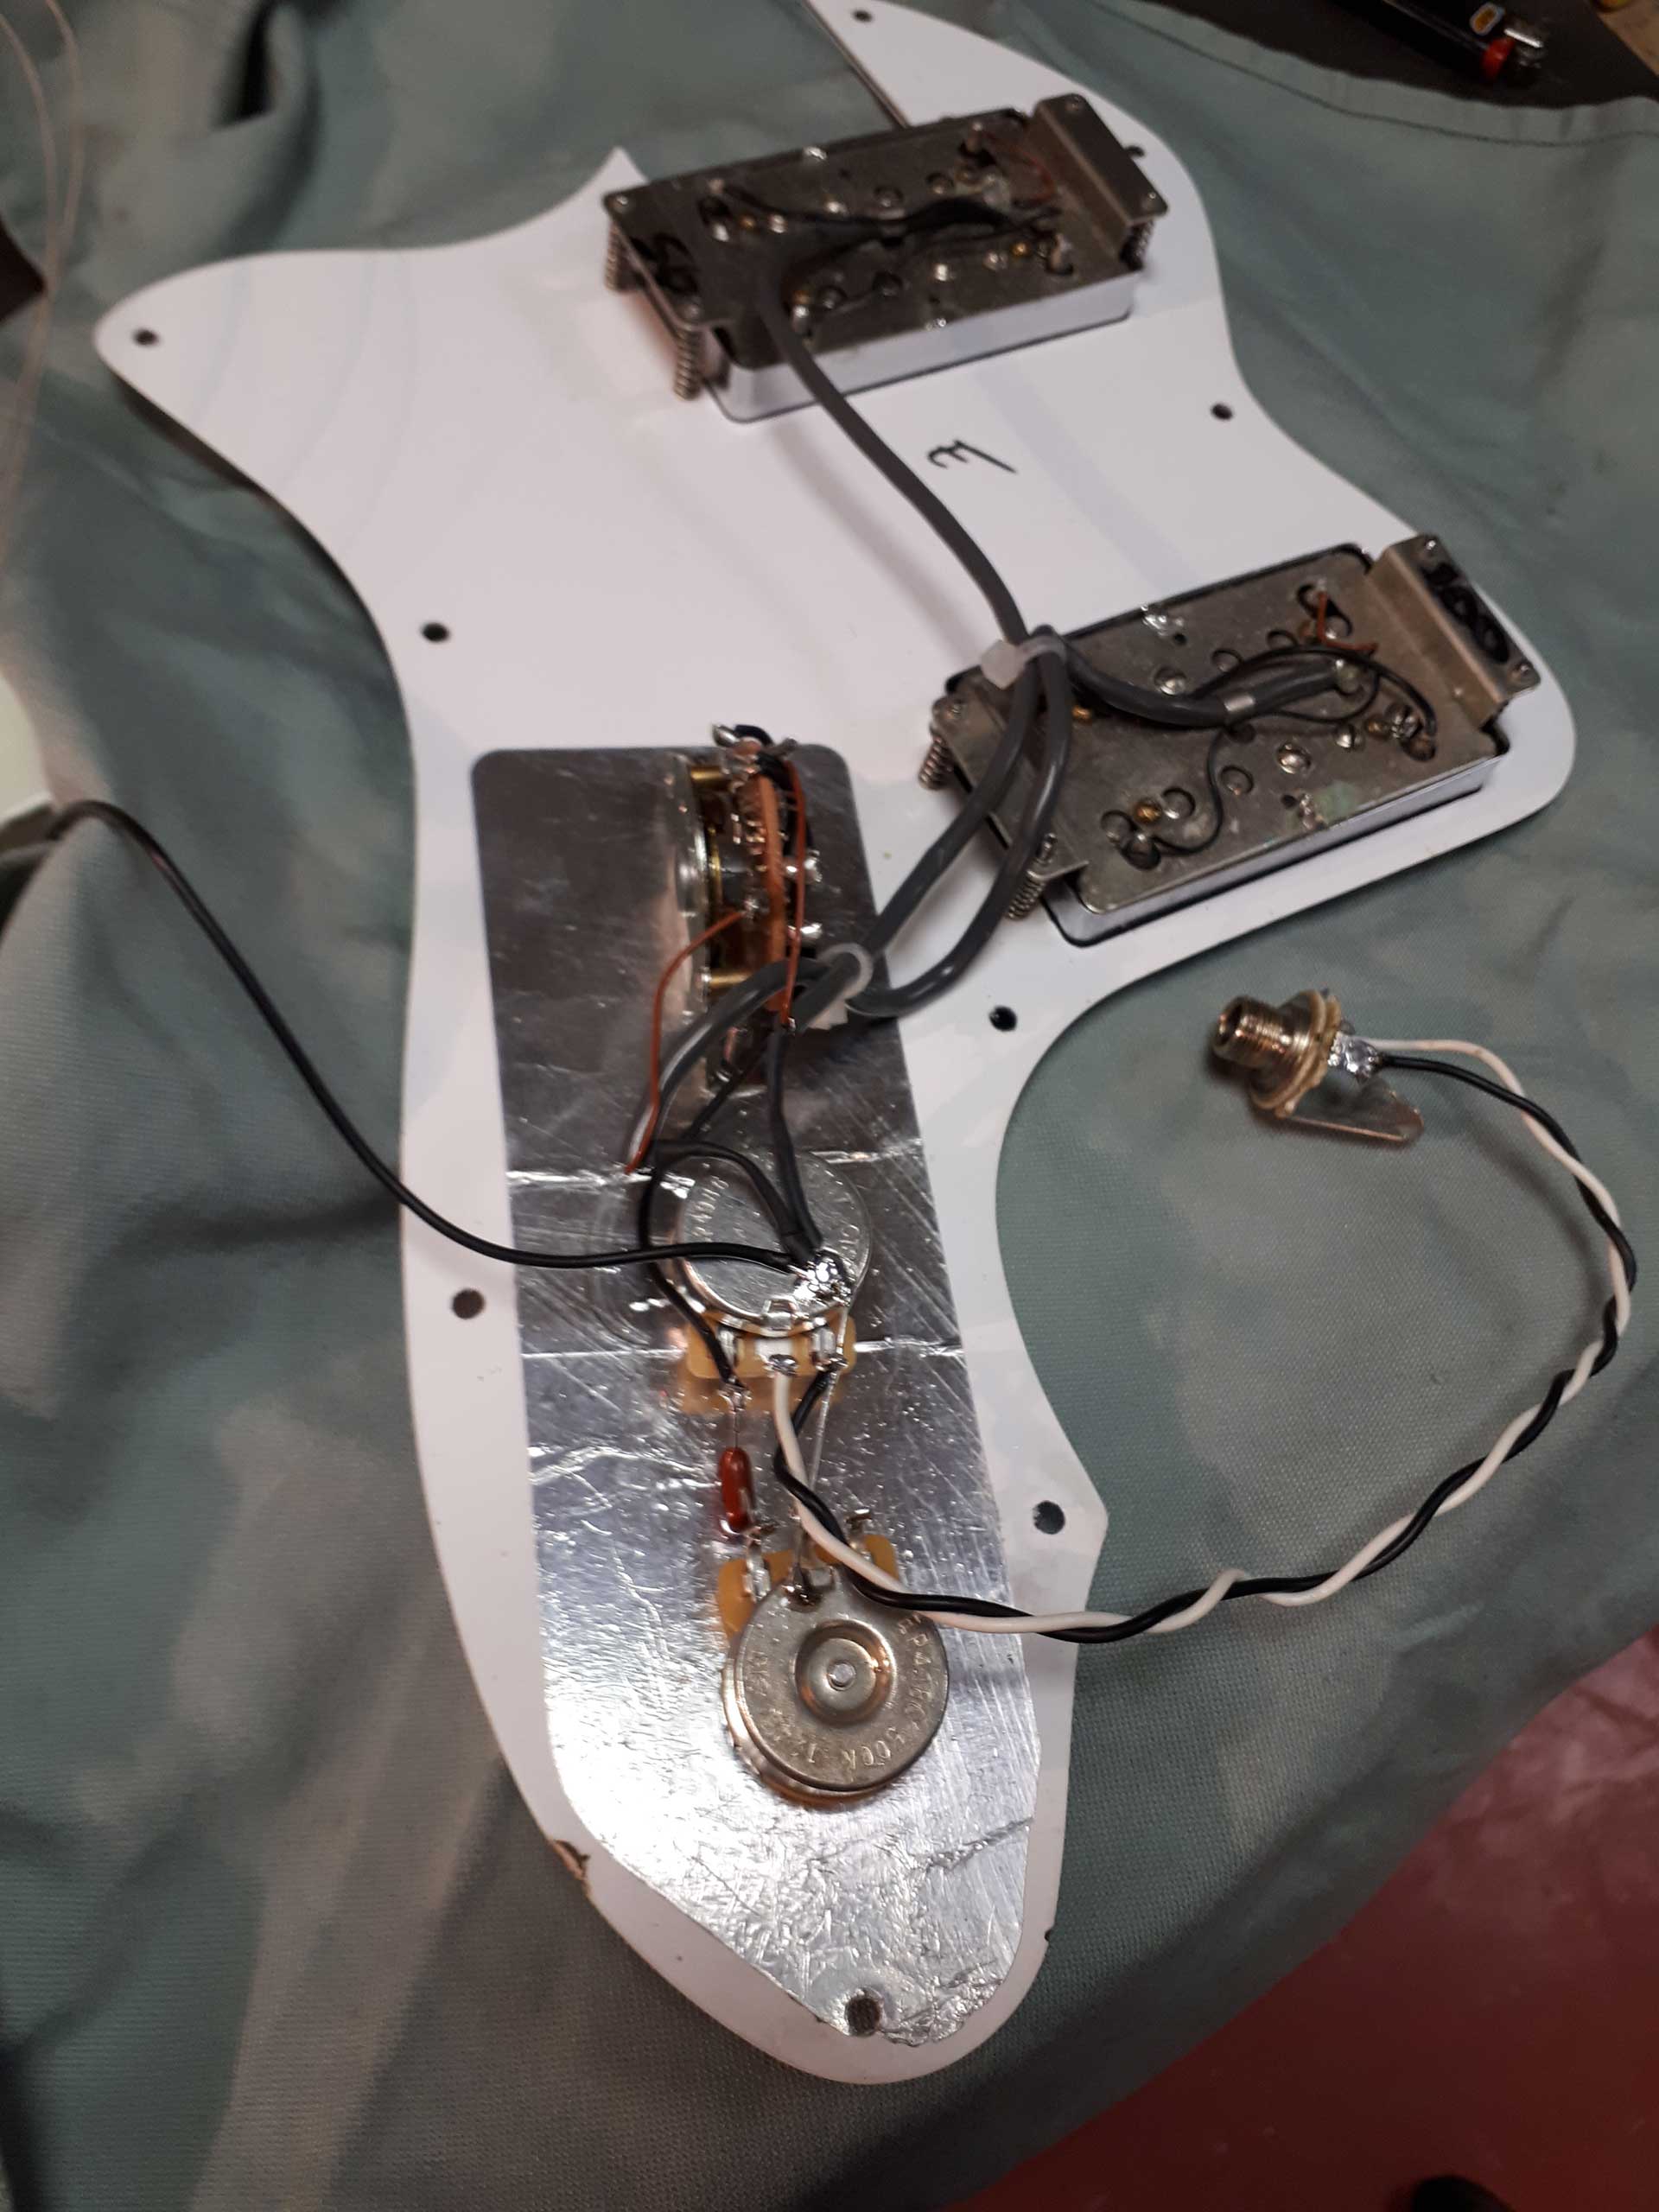 Wiring on different types of guitars SG Stratocaster Telecaster and Flying V